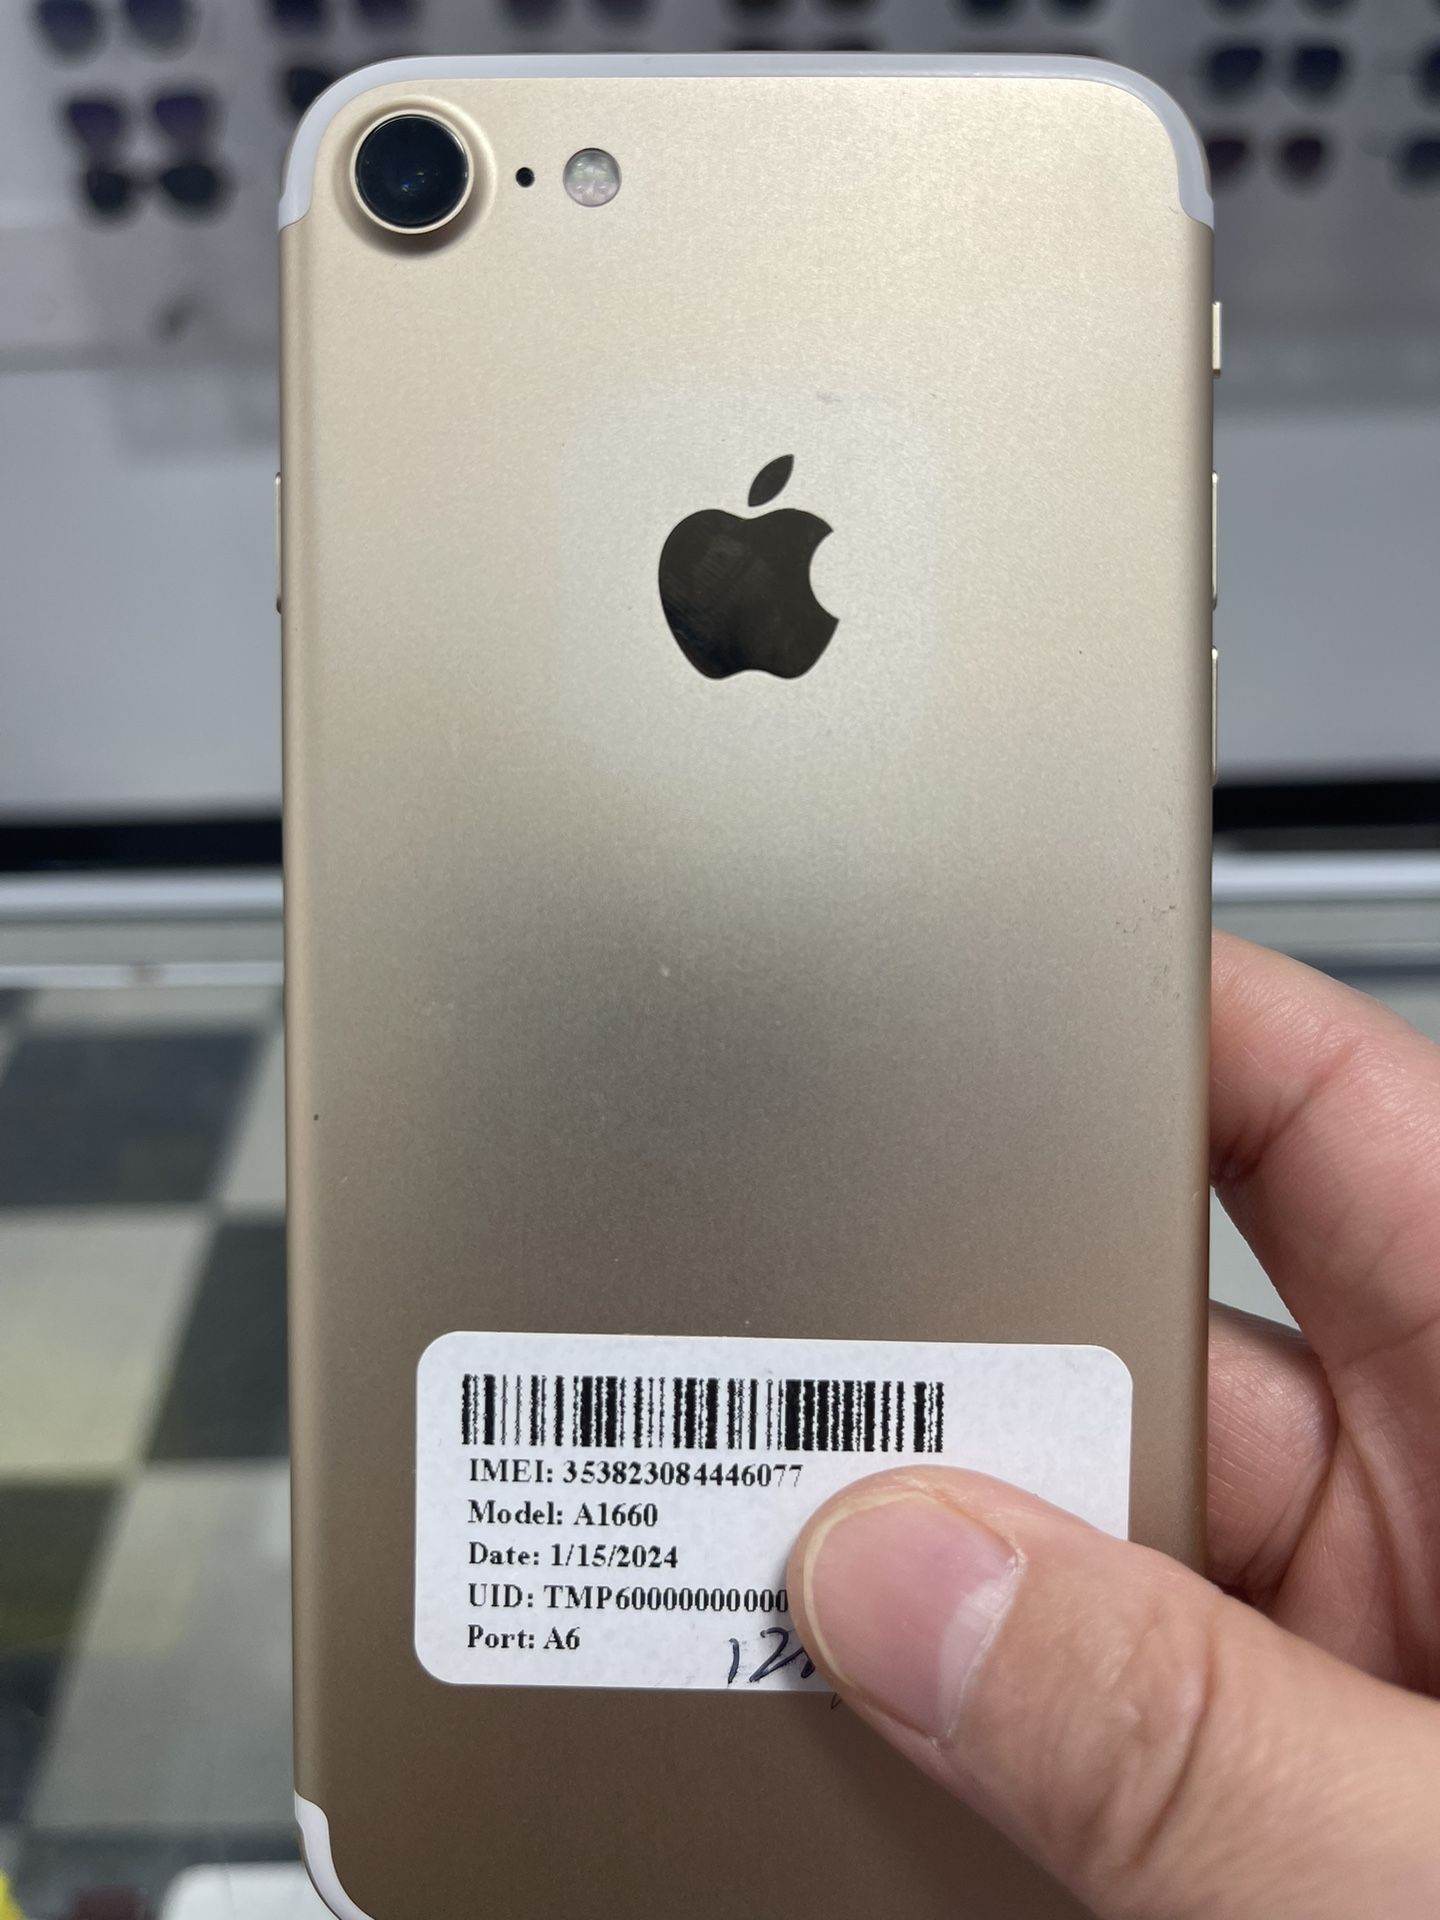 Apple iPhone 7 128GB Unlocked Selling By Store 